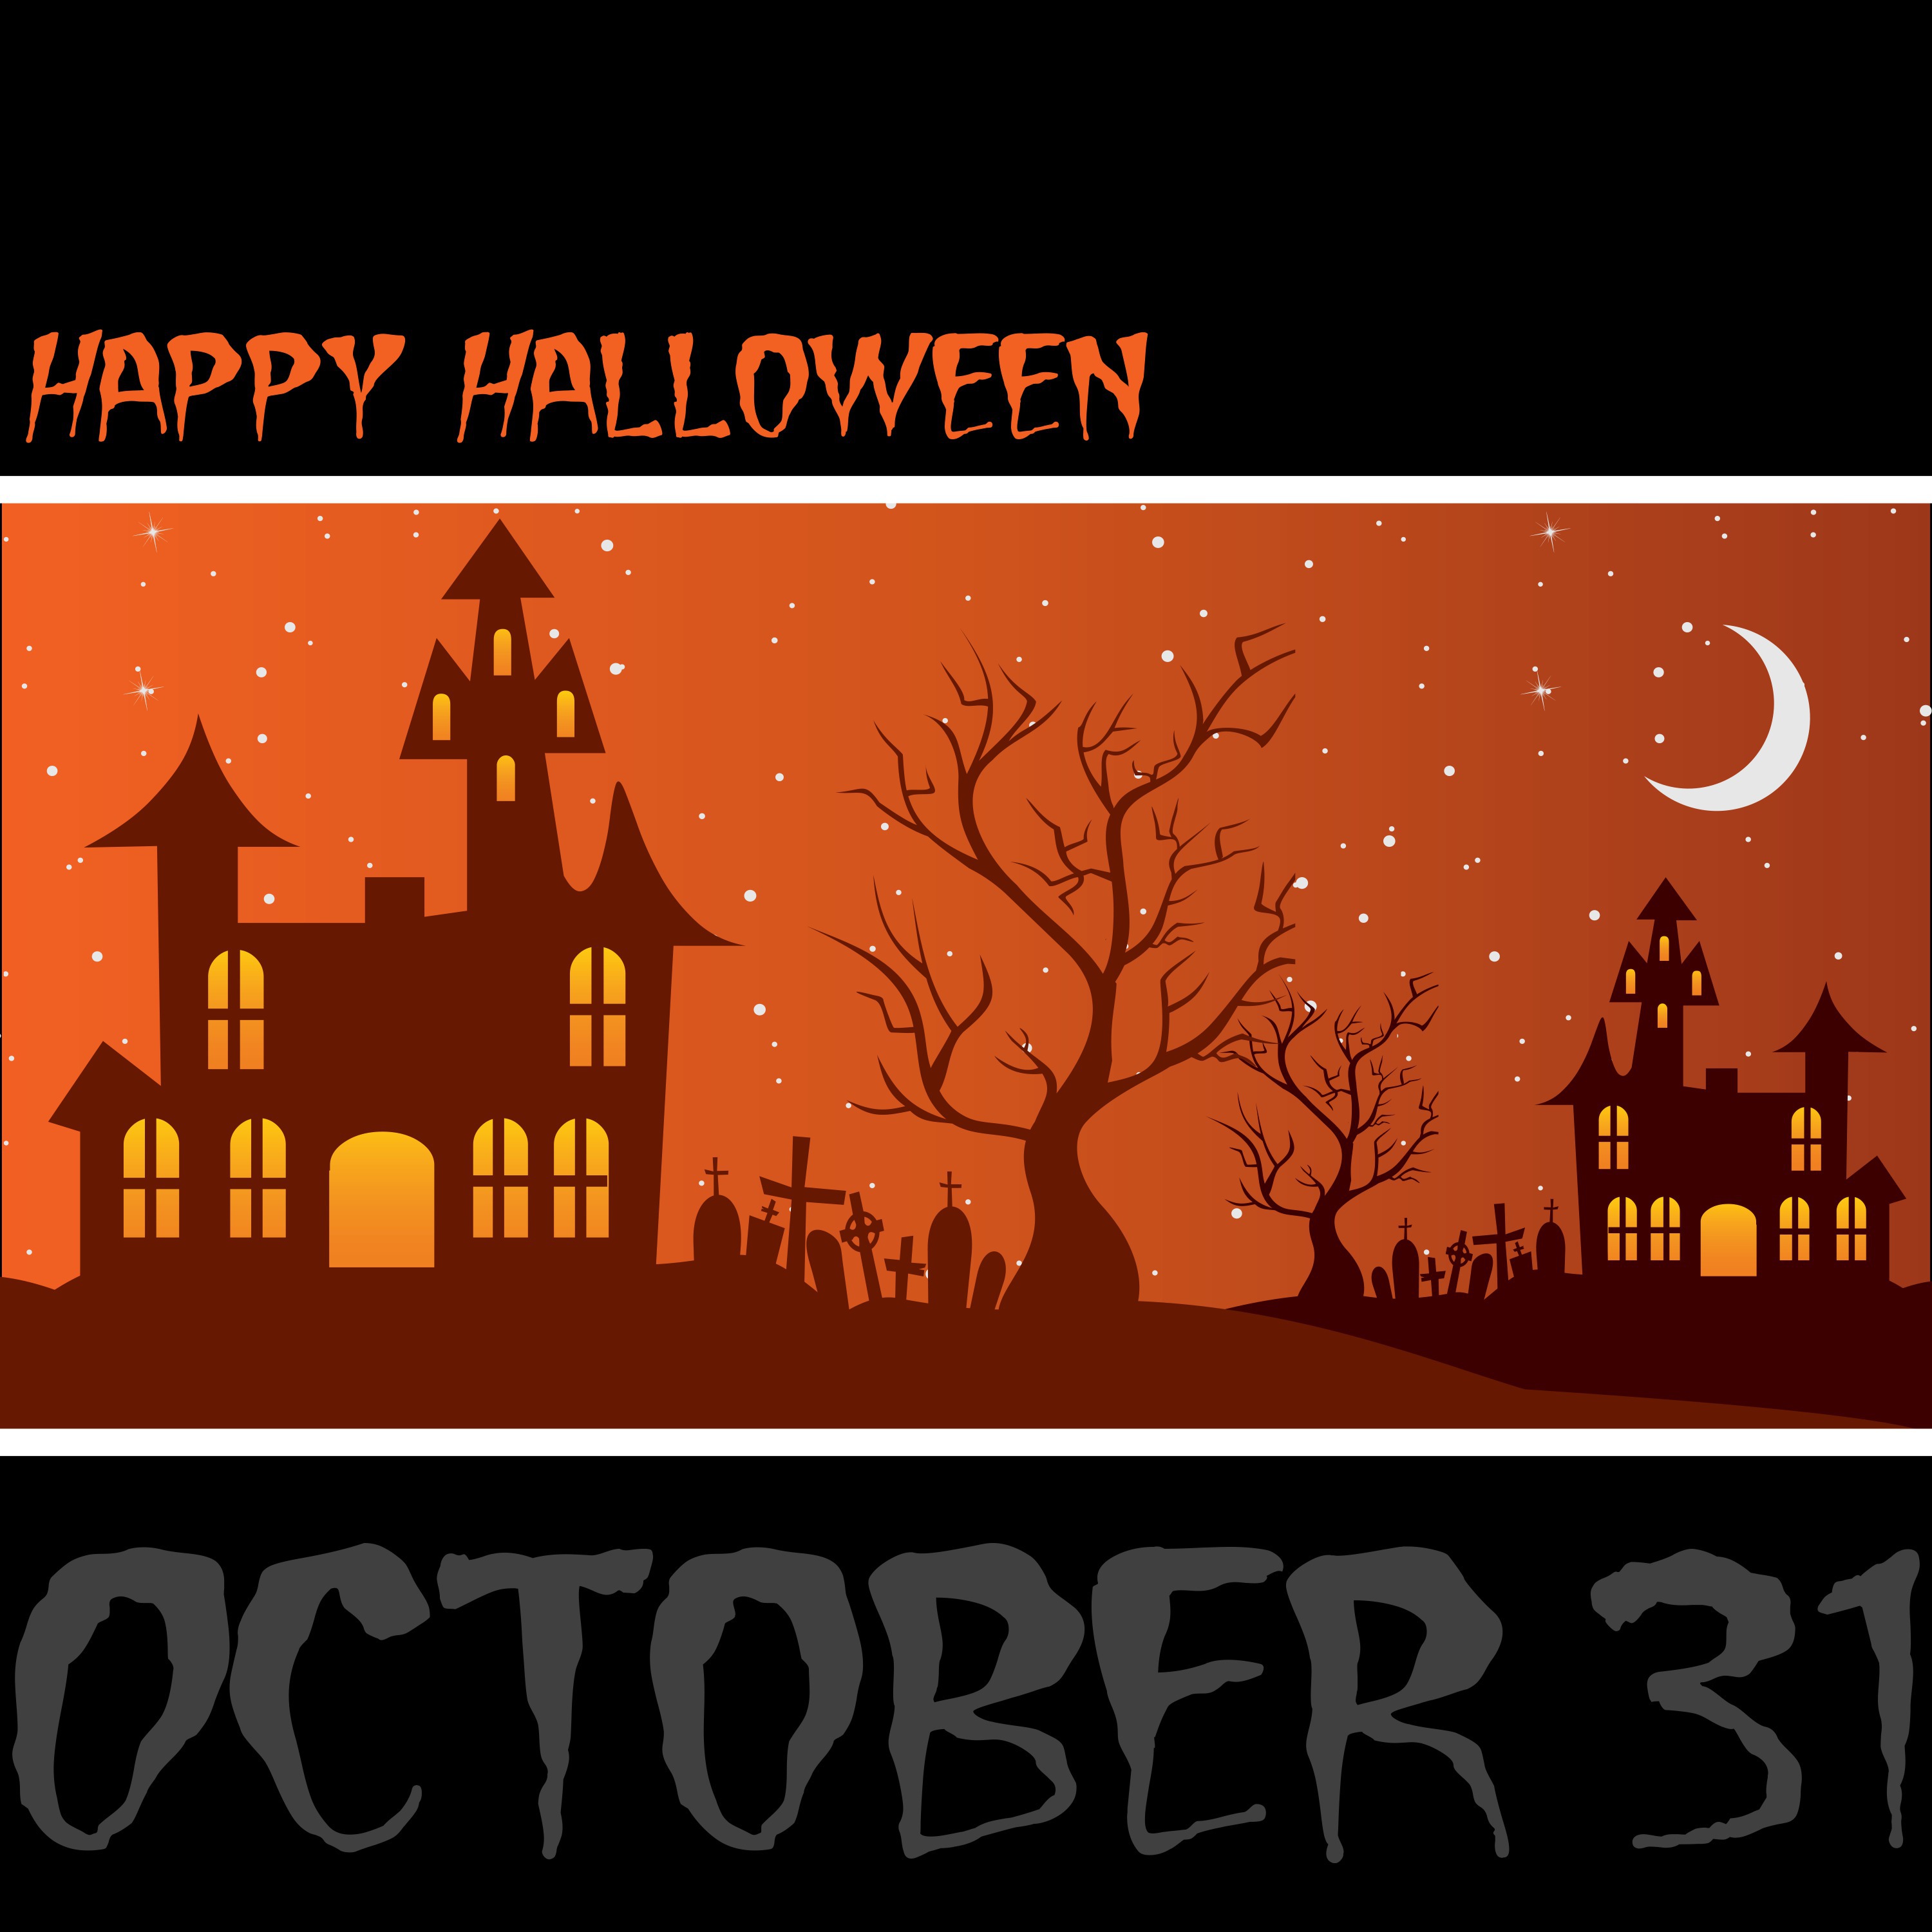 haunted-house-happy-halloween-card-in-vector-format_GybUlVo__L